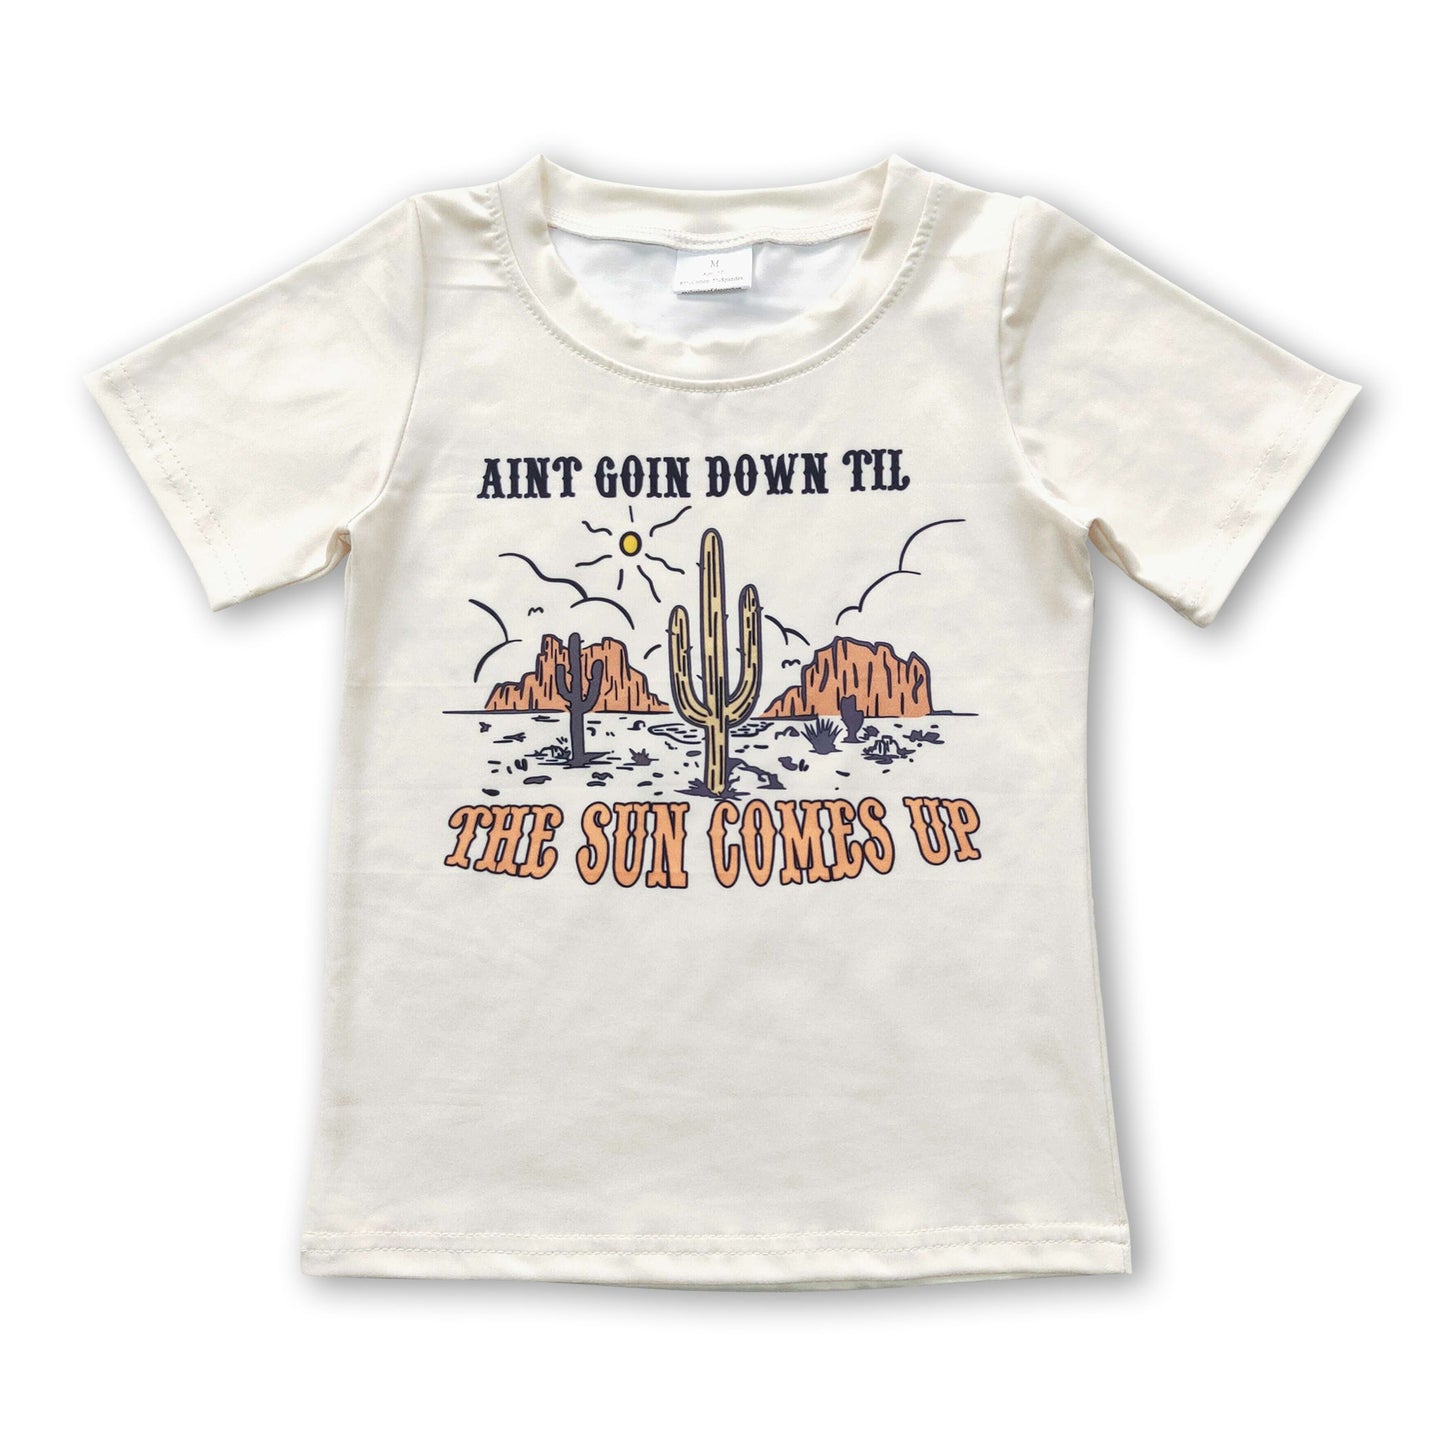 Ain't goin down til the sun comes up baby kids shirt